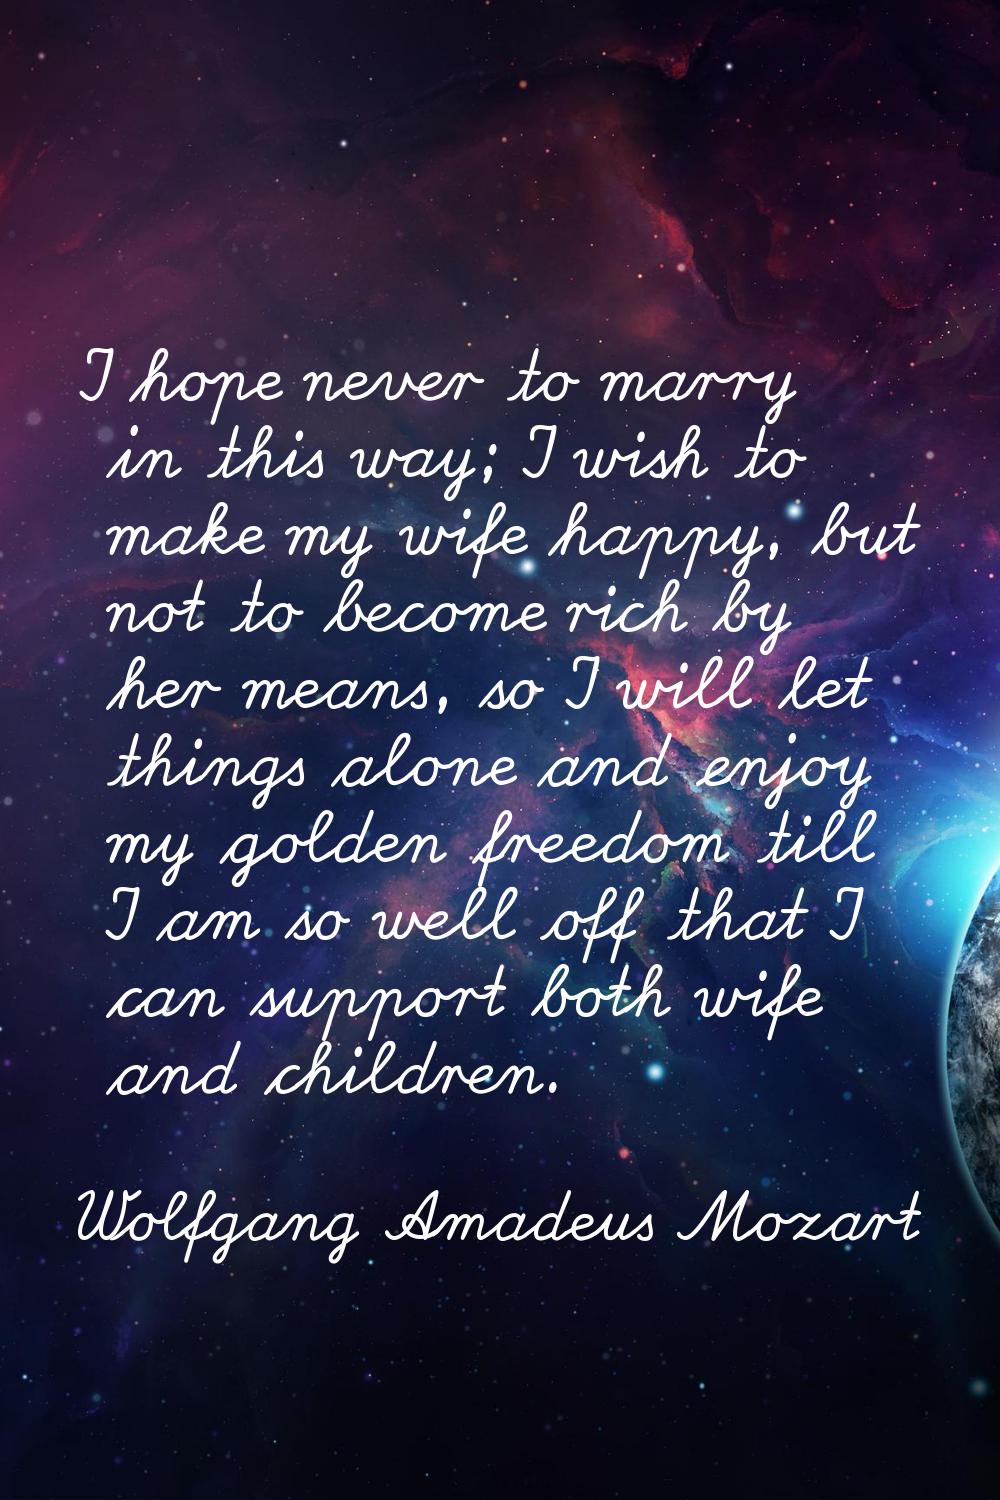 I hope never to marry in this way; I wish to make my wife happy, but not to become rich by her mean